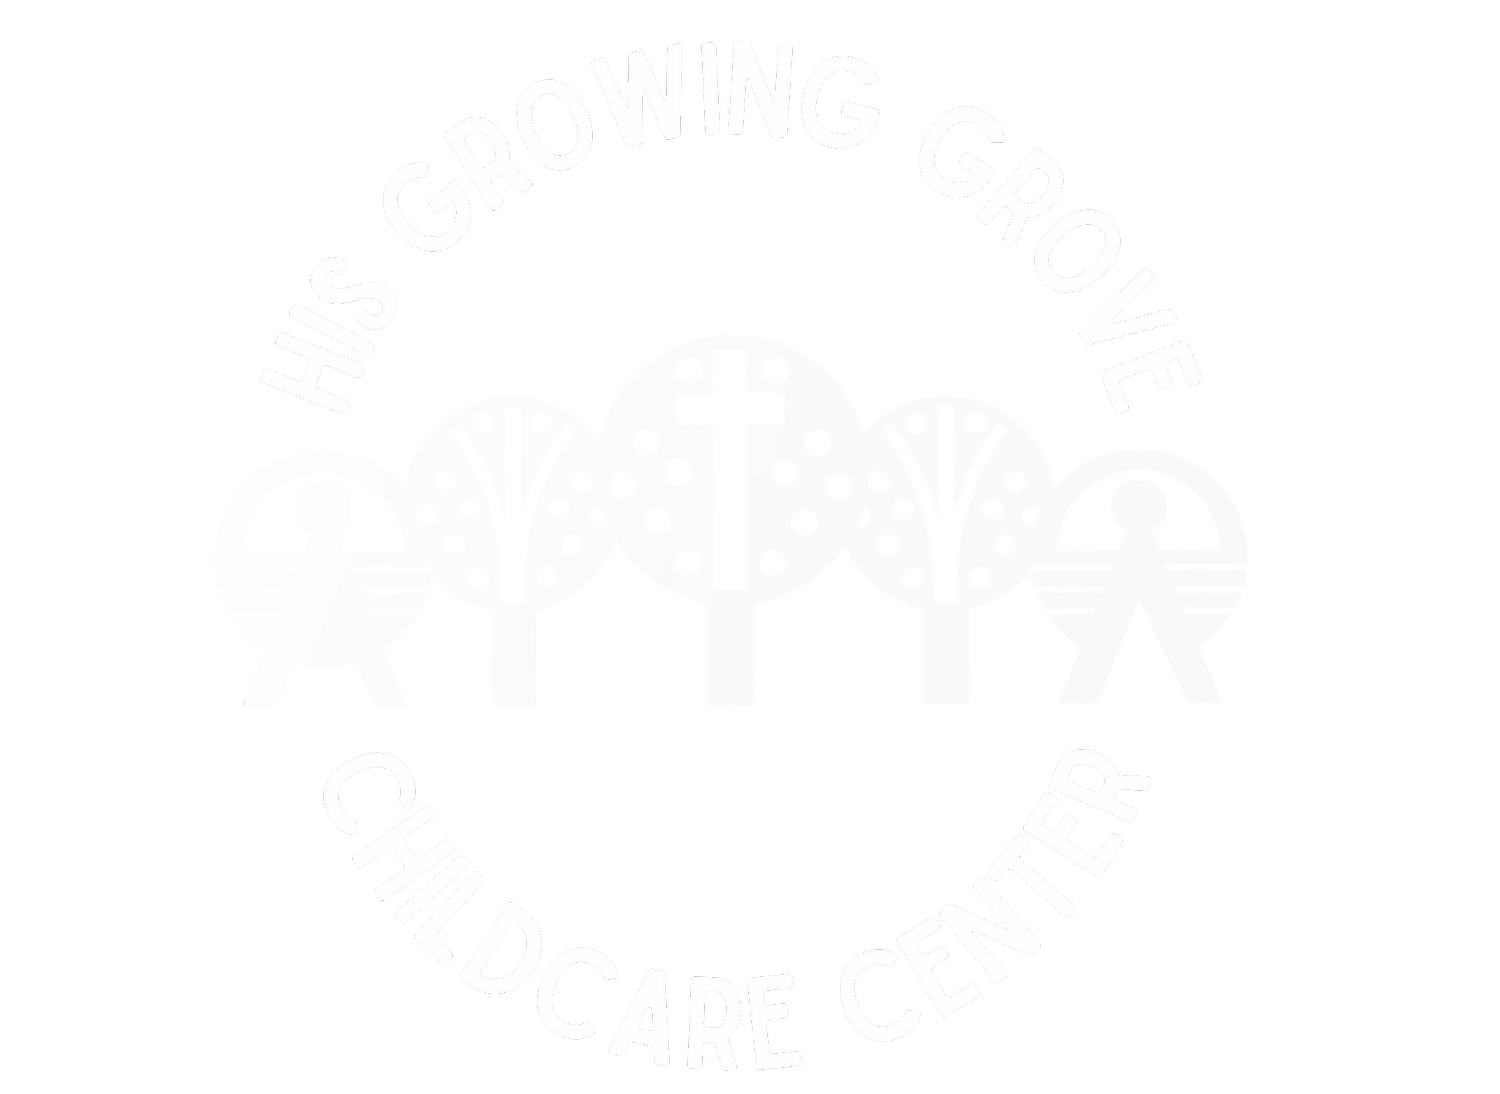 His Growing Grove